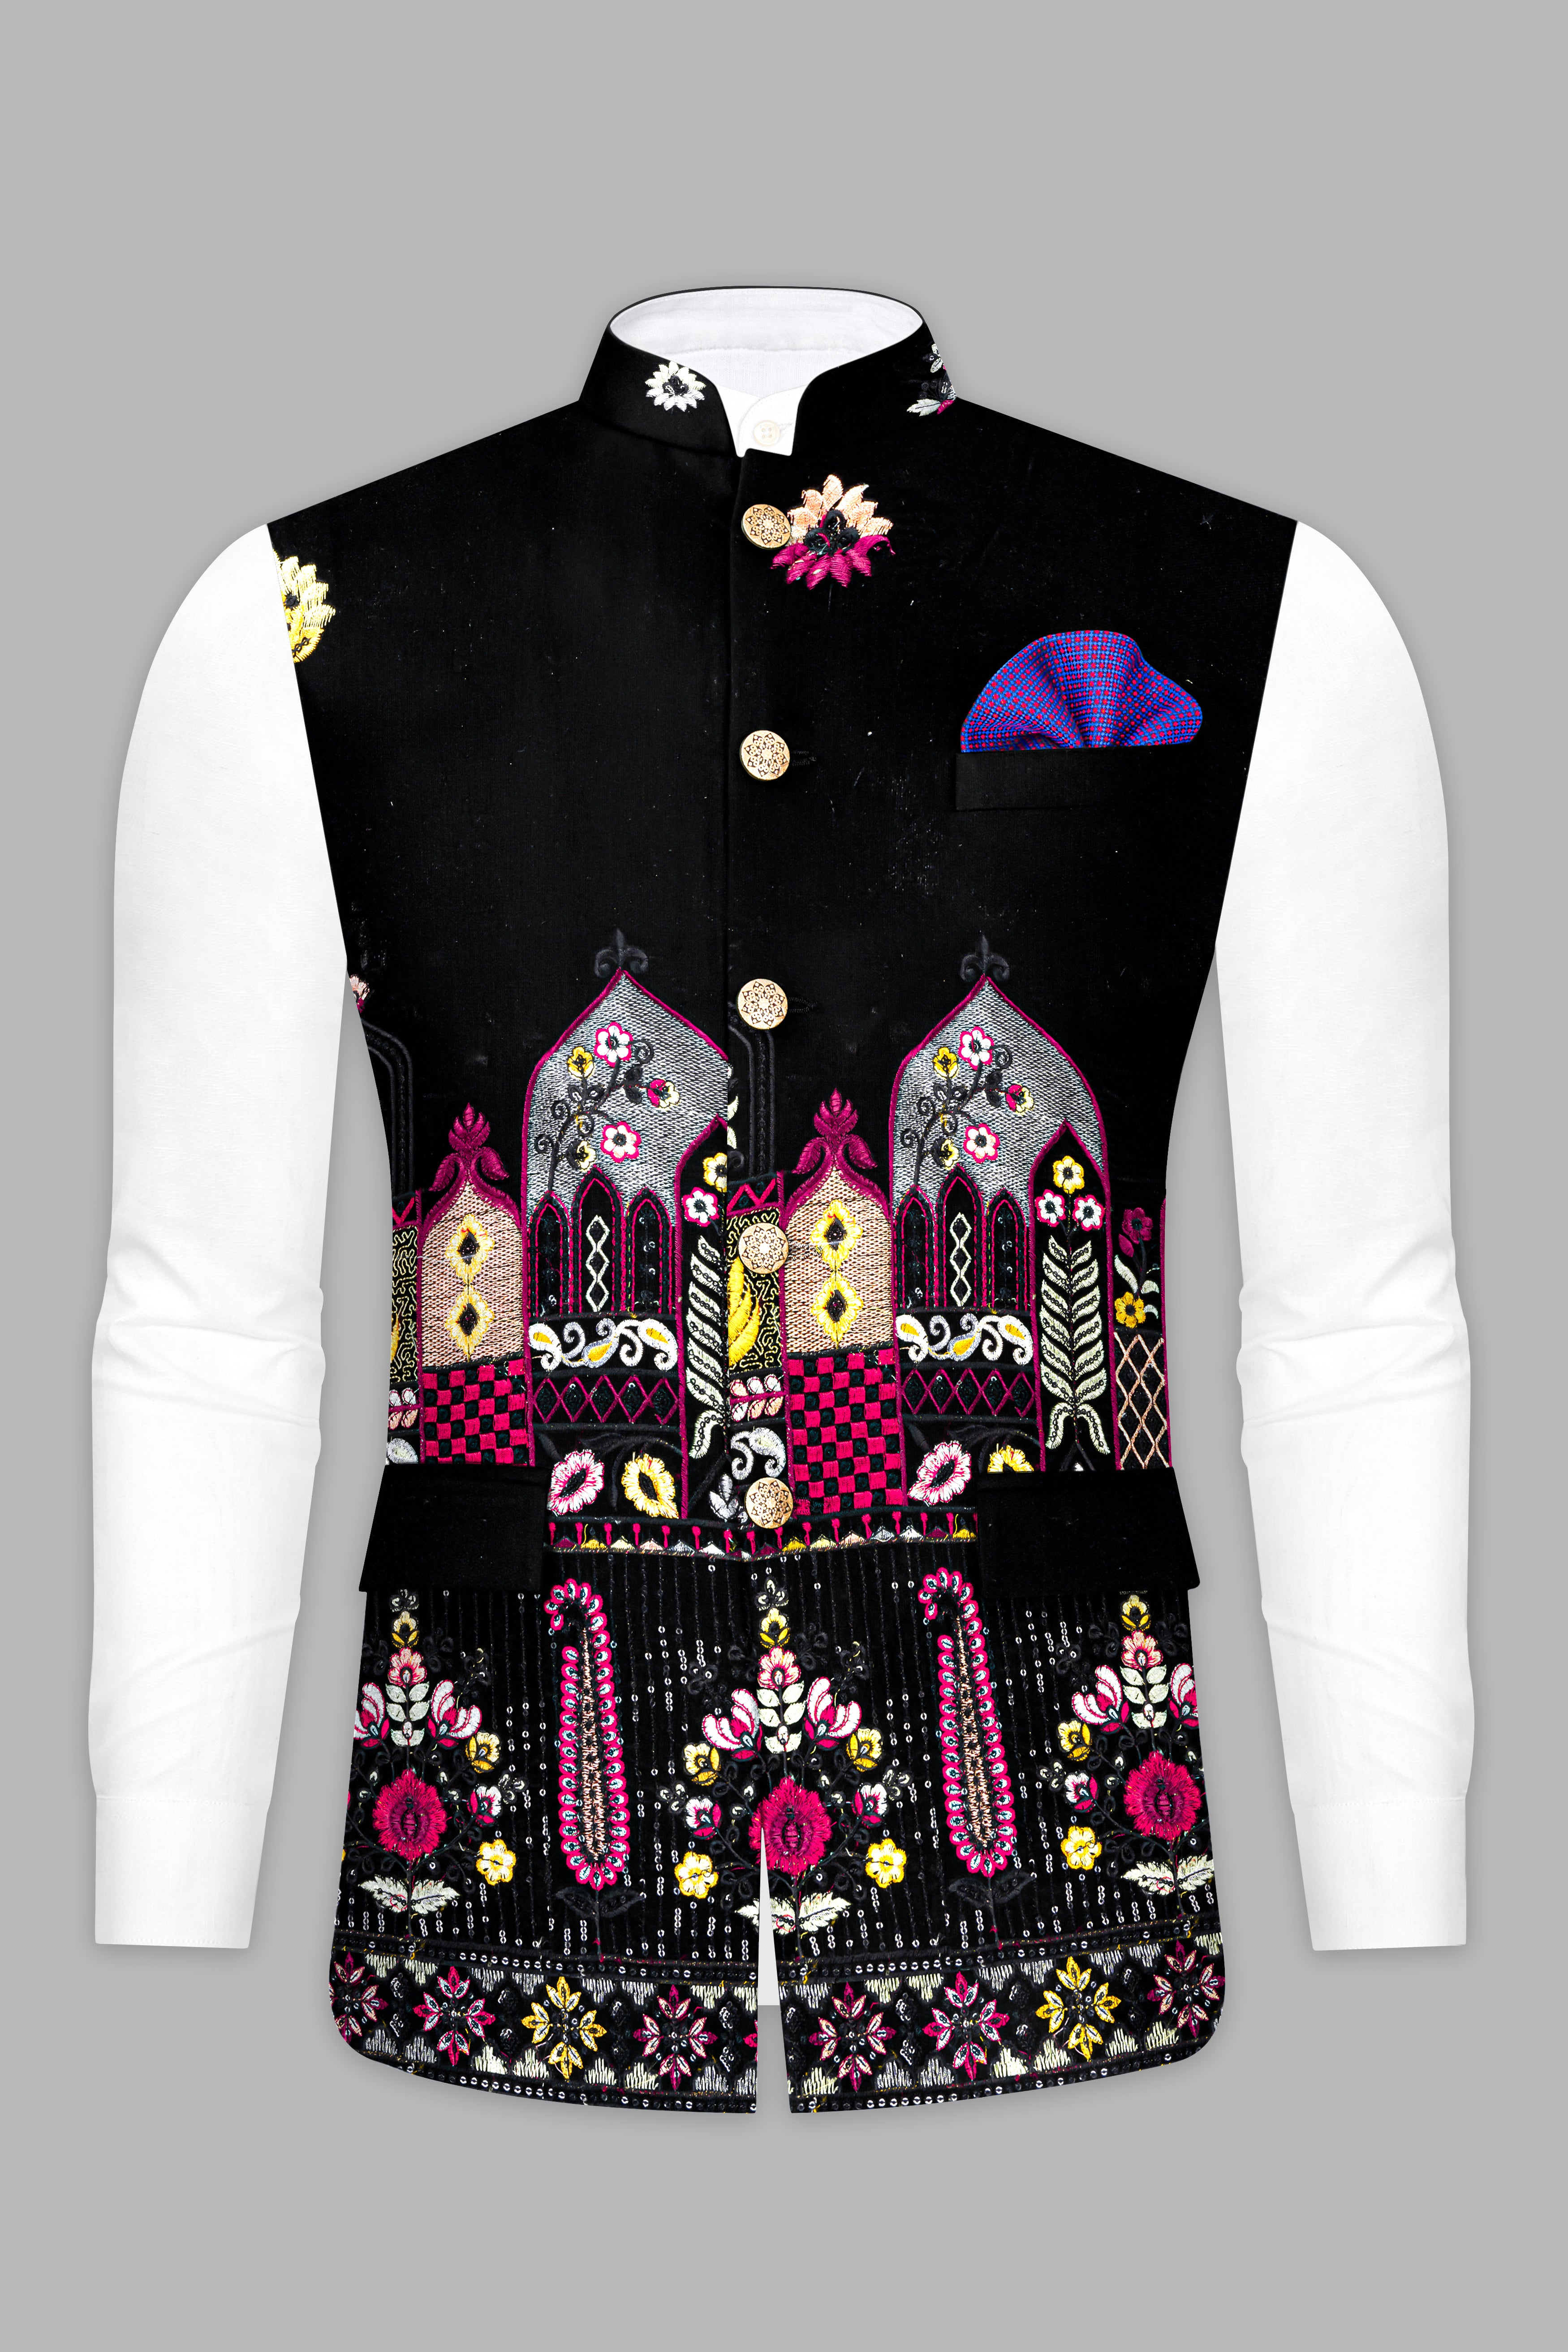 Jade Black and Crimson Pink Multicolour Floral Thread Embroidered Nehru Jacket WC3529-36,  WC3529-38,  WC3529-40,  WC3529-42,  WC3529-44,  WC3529-46,  WC3529-48,  WC3529-50,  WC3529-52,  WC3529-54,  WC3529-56,  WC3529-58,  WC3529-60